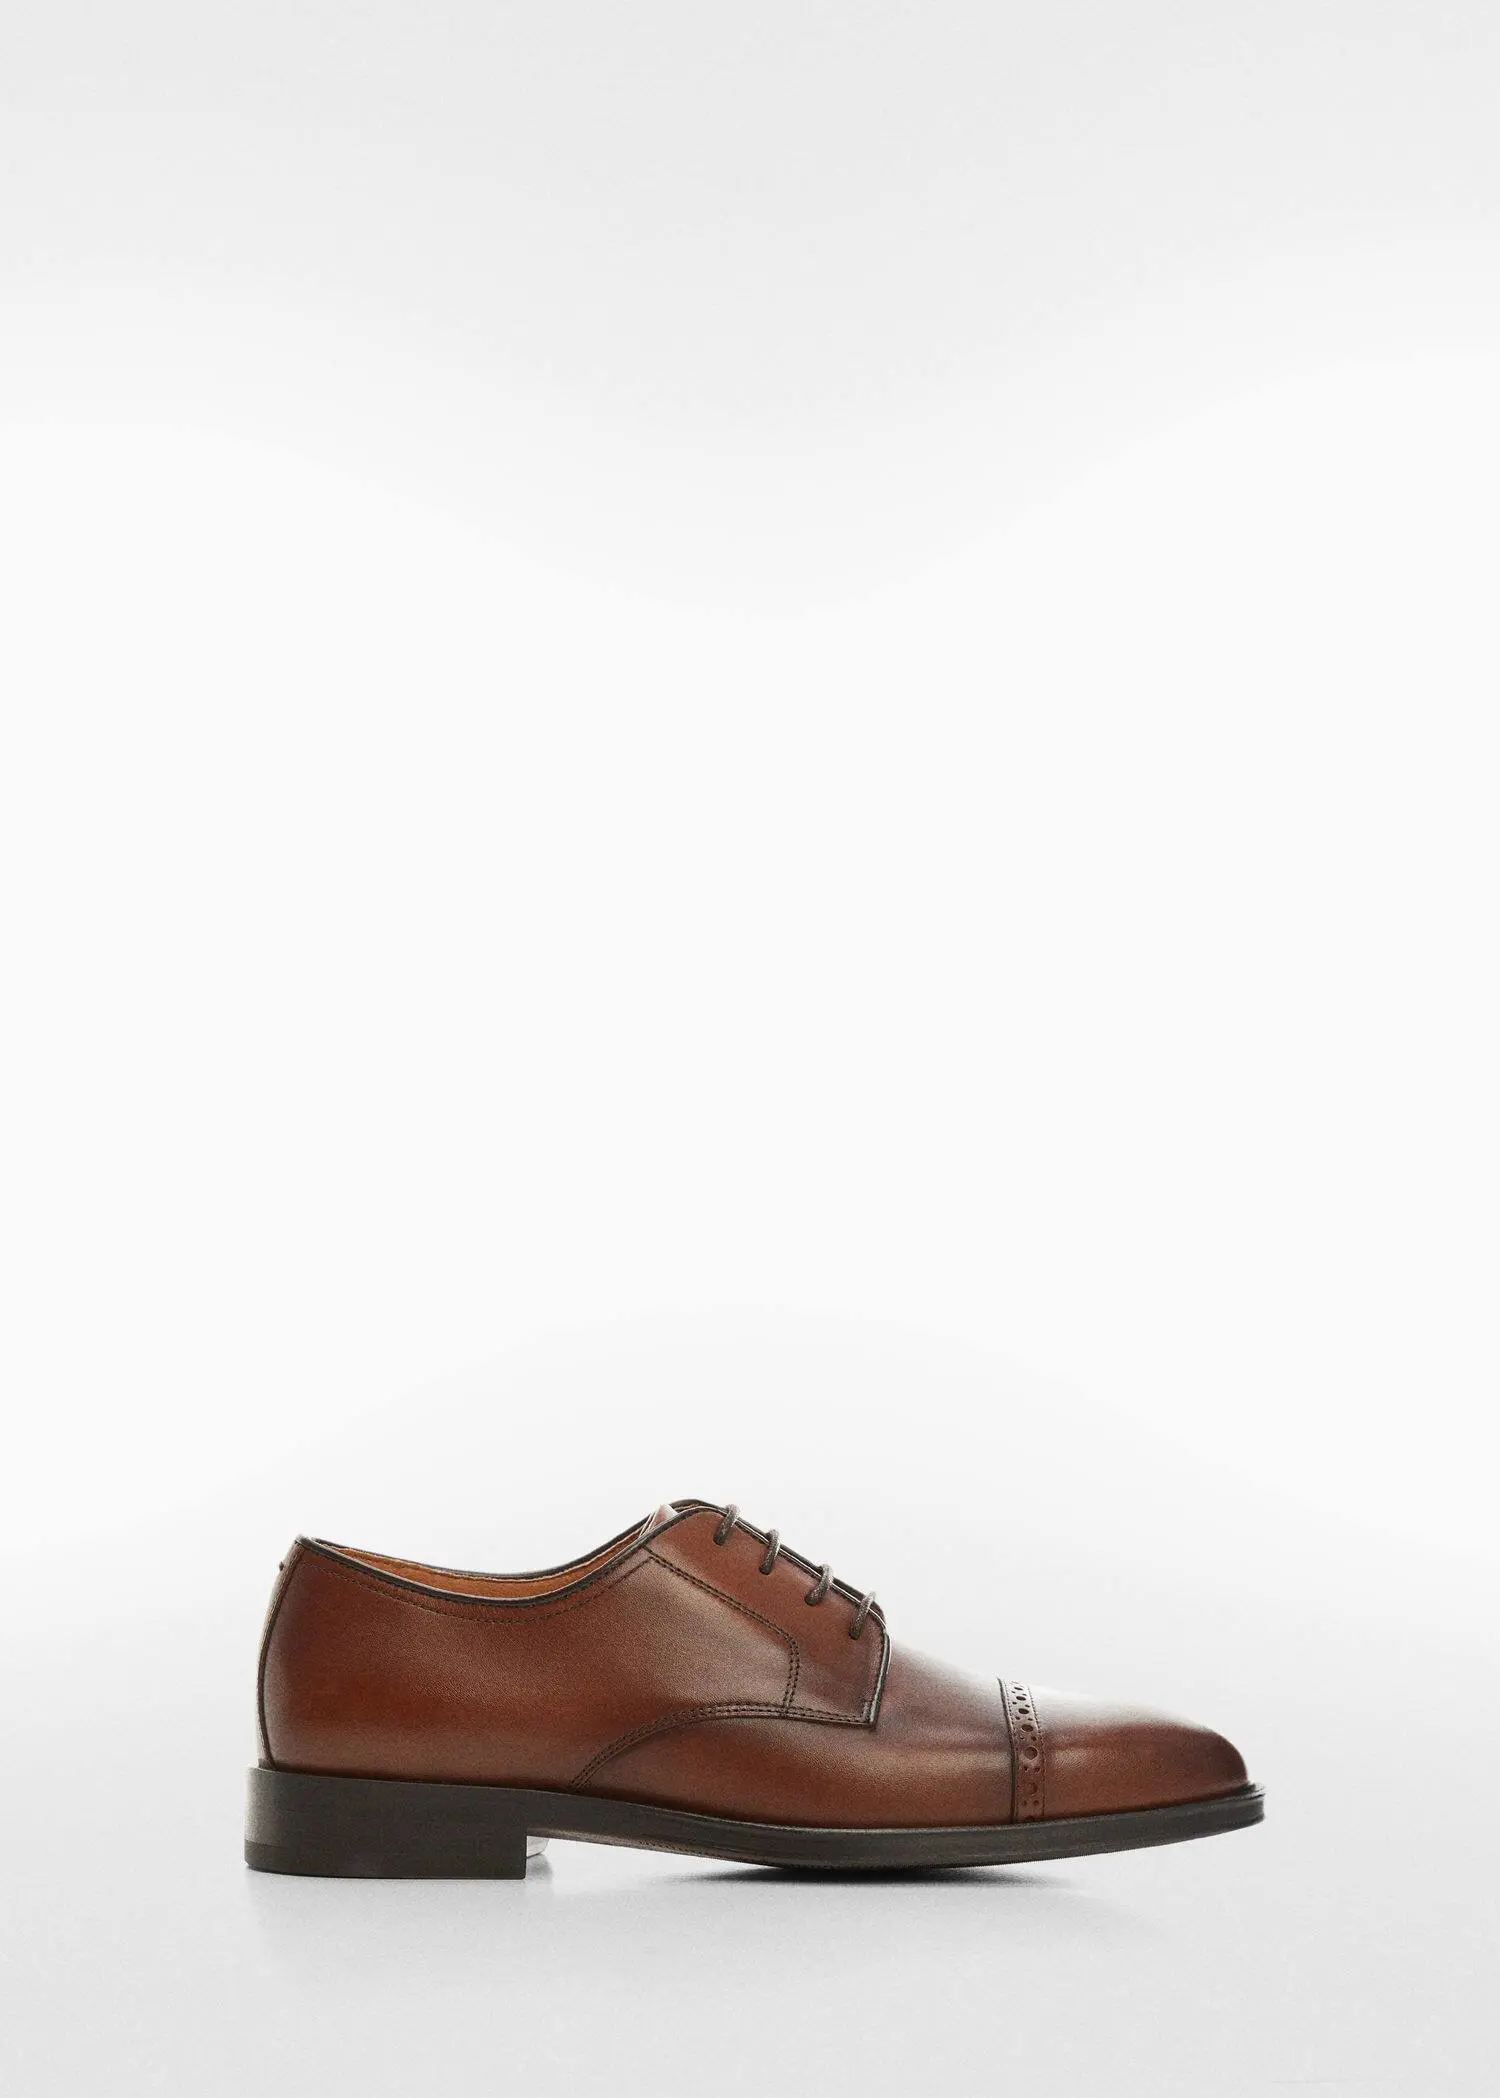 Mango Leather suit shoes. a pair of brown shoes on a white background. 